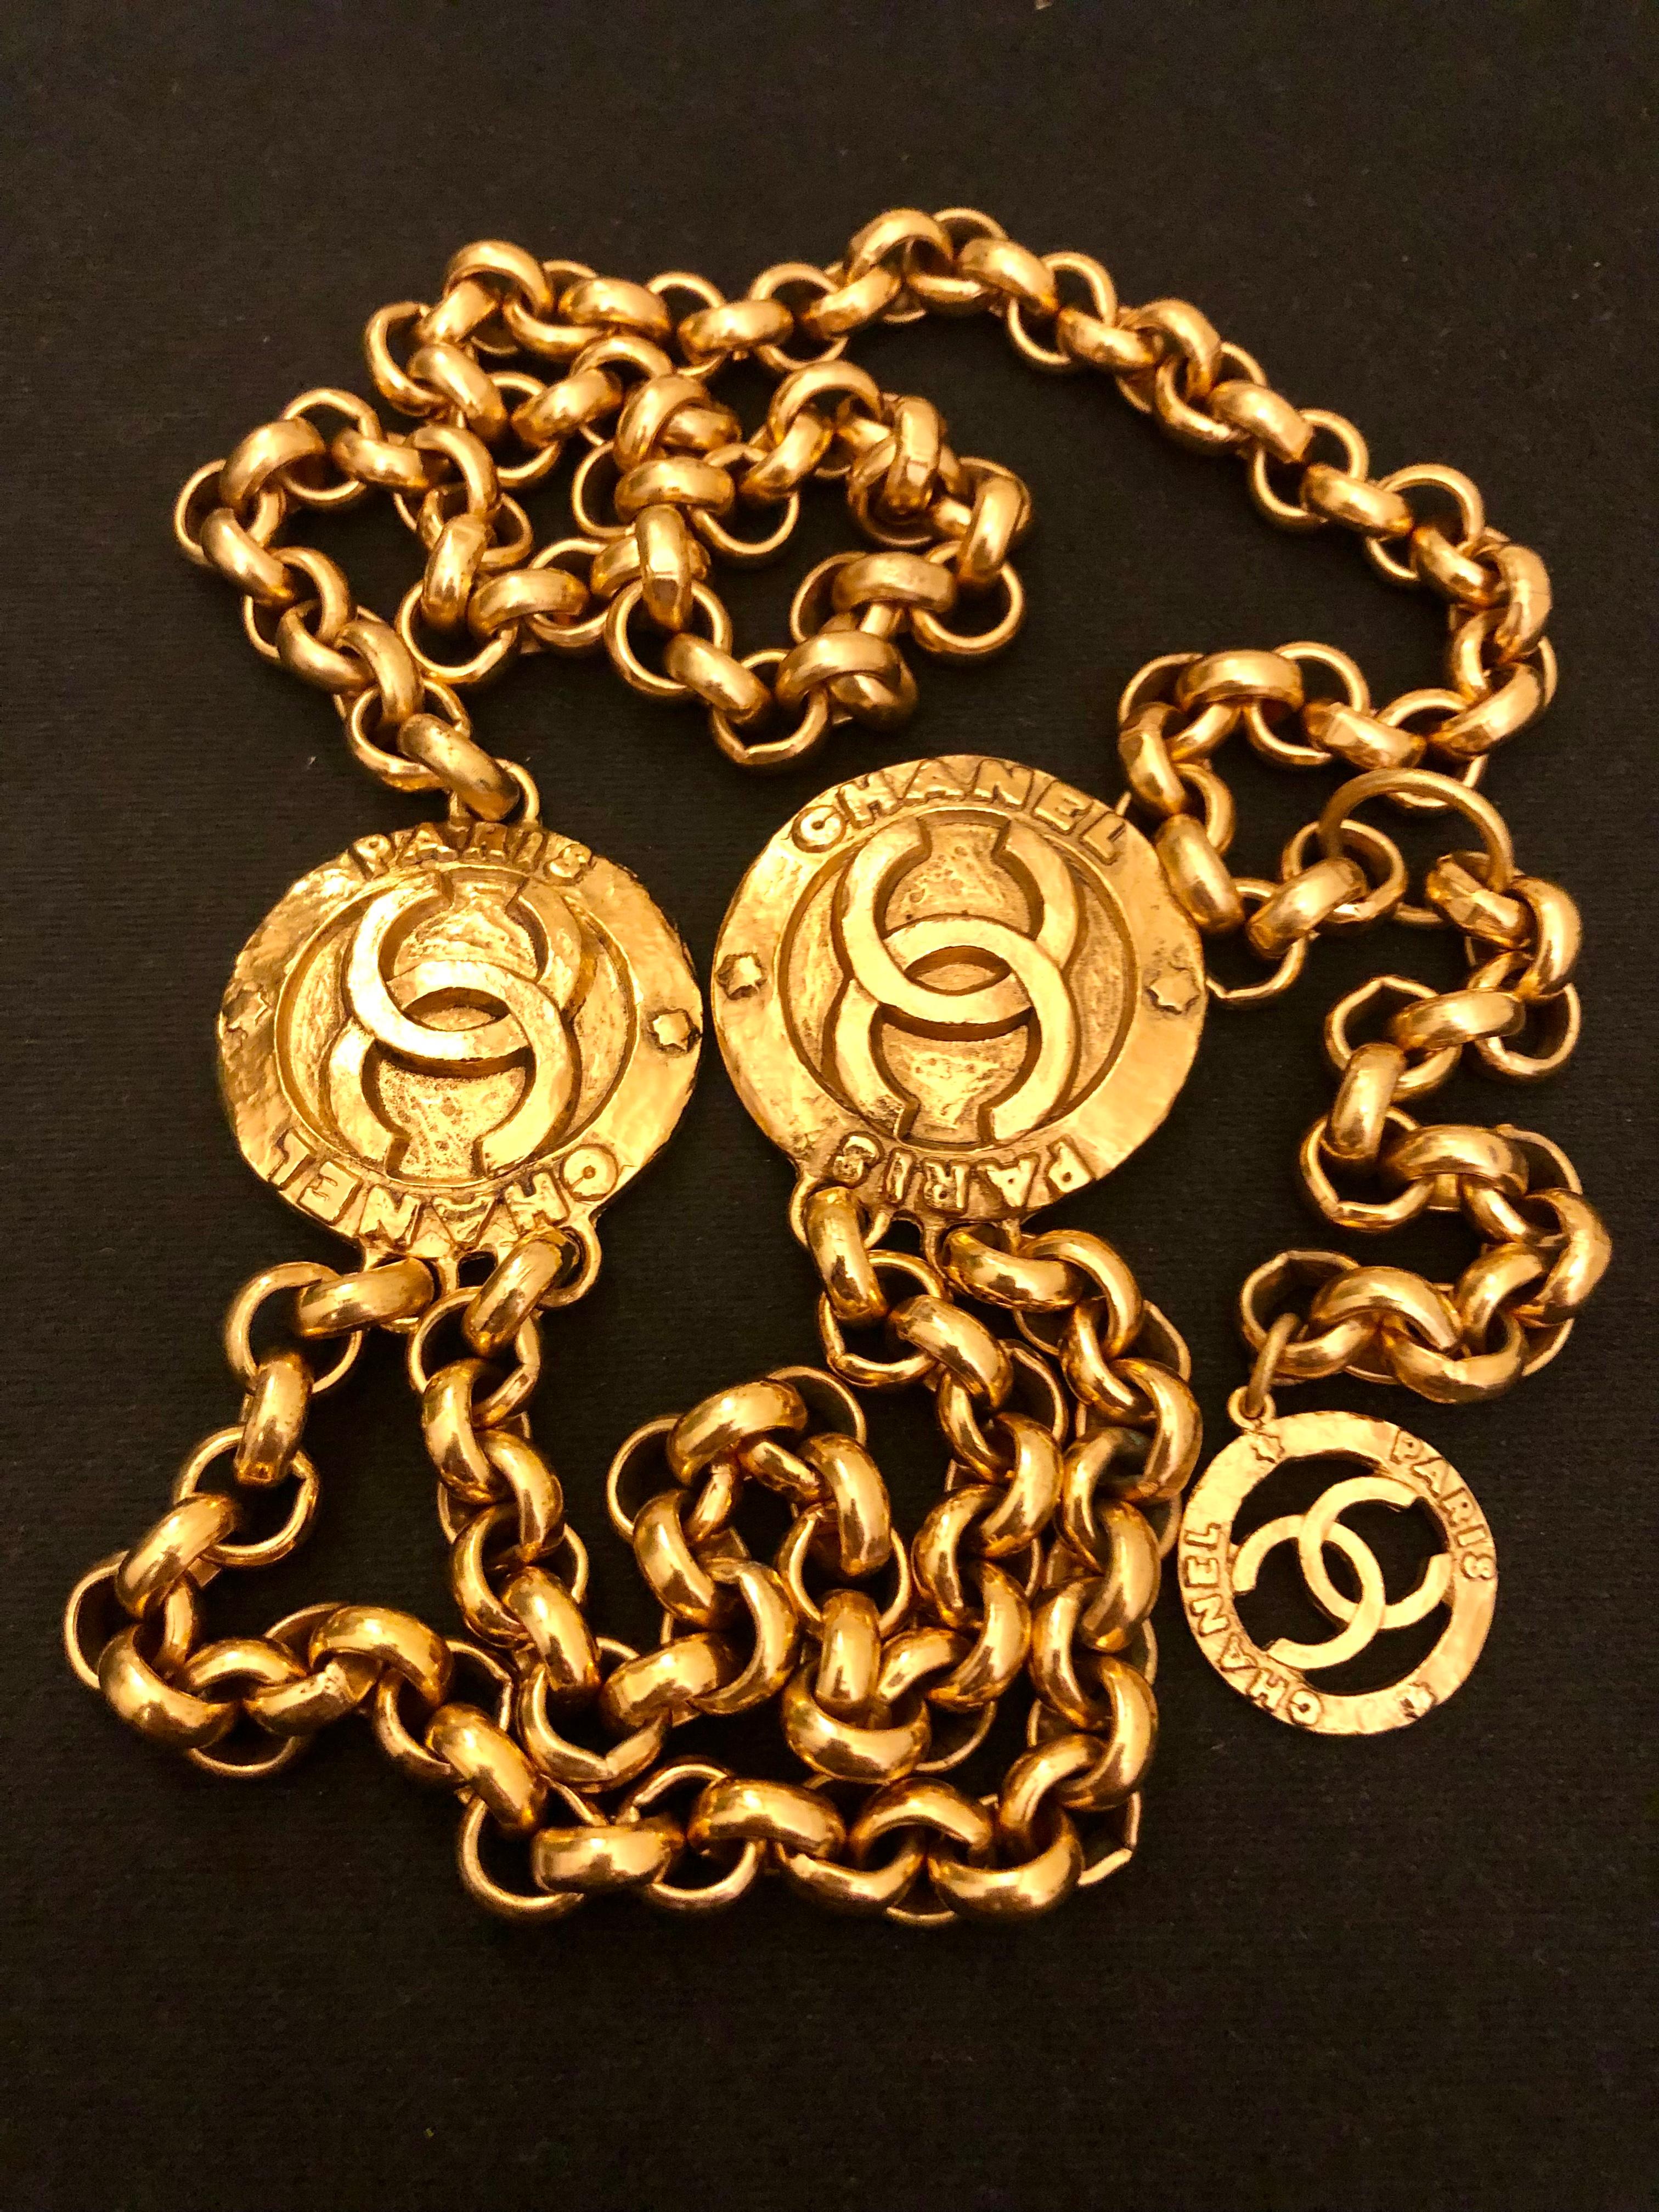 This vintage CHANEL chain belt is crafted of gold toned sturdy double chains featuring two large CC medallions and a small CC medallion charm. Hook fastening closure. Measures approximately 90 cm including medallions and medallions measure 4 cm and